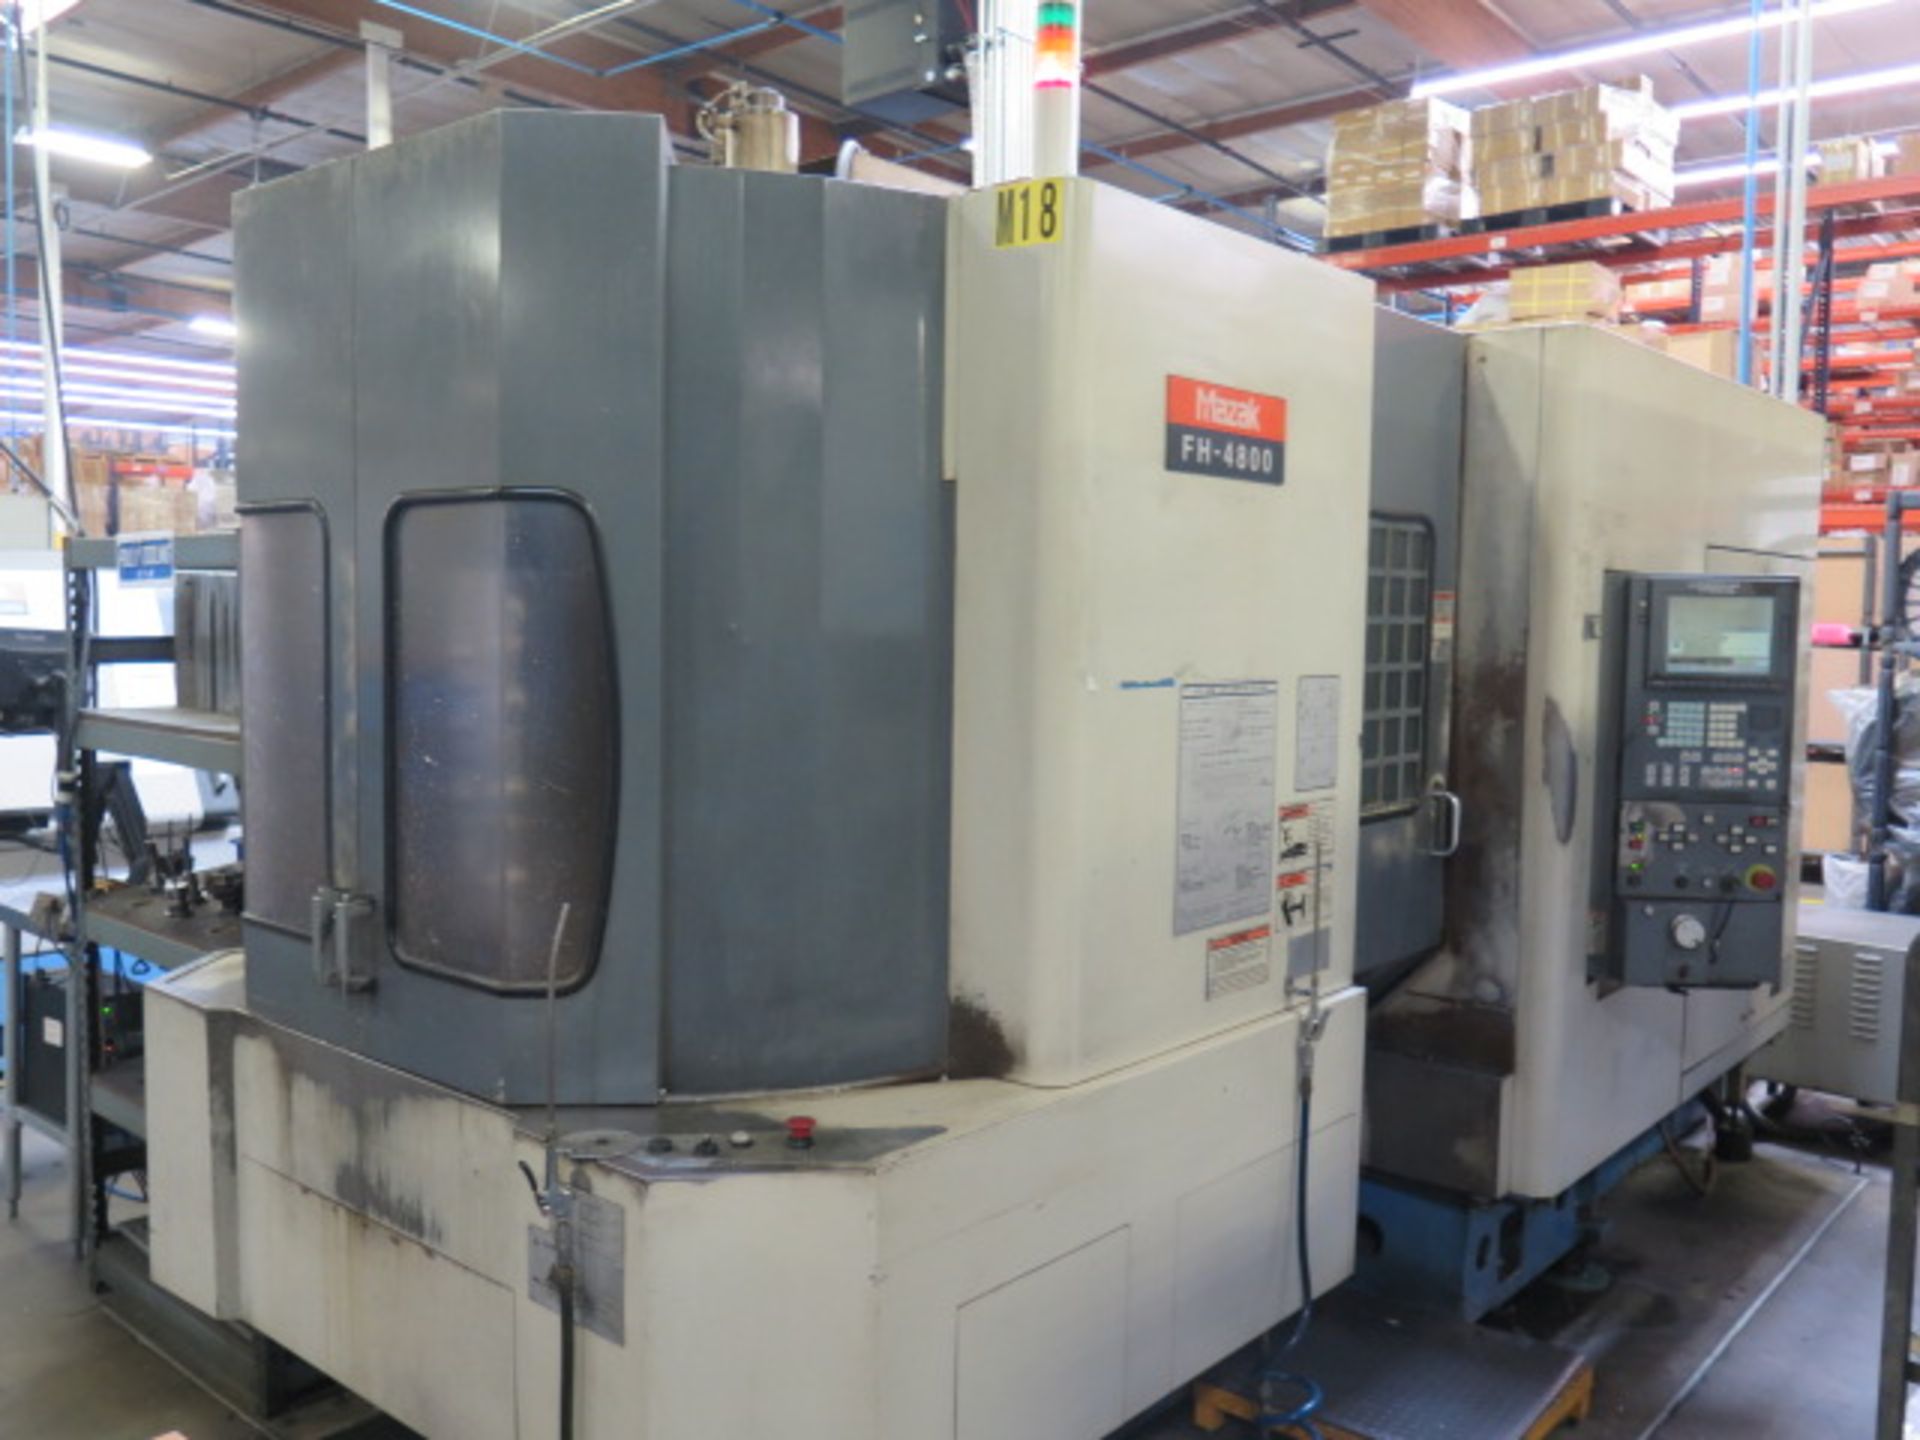 Mazak FH 4800 2-Pallet CNC HMC (TOOLING NOT INCLUDED) w/ Mazatrol 640M PC-Fusion-CNC, SOLD AS IS